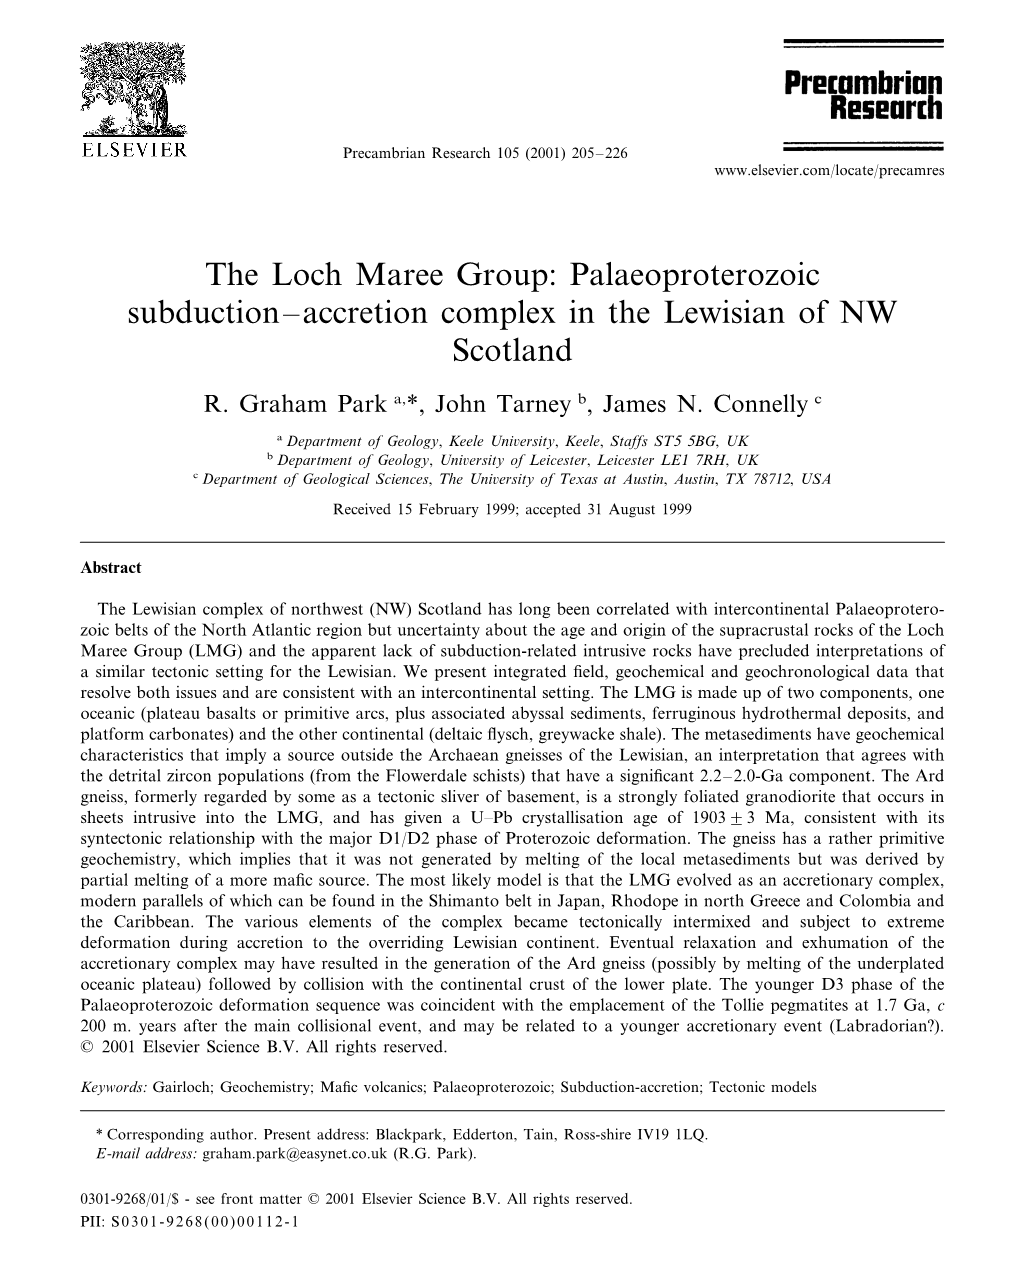 The Loch Maree Group: Palaeoproterozoic Subduction–Accretion Complex in the Lewisian of NW Scotland